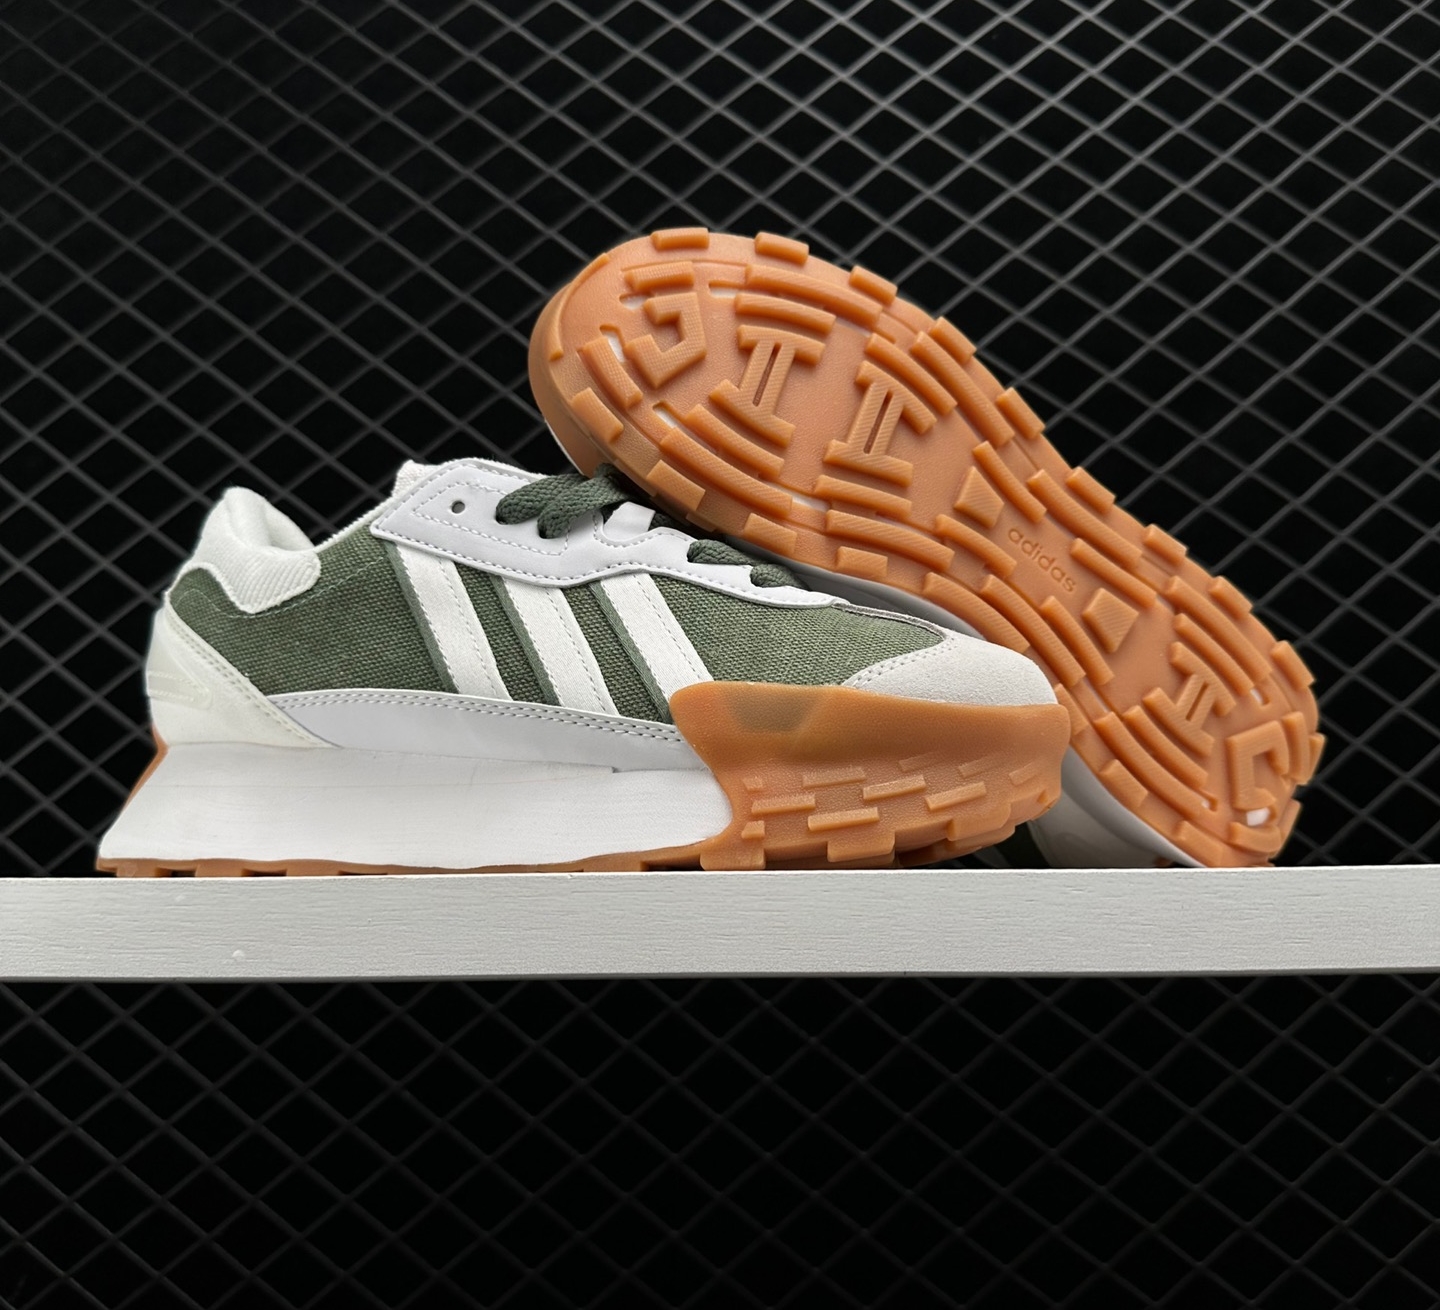 Adidas Neo Futro Mixr Lifestyle Shoes 'White Olive Green' IE2119 - Classy and Sporty Footwear